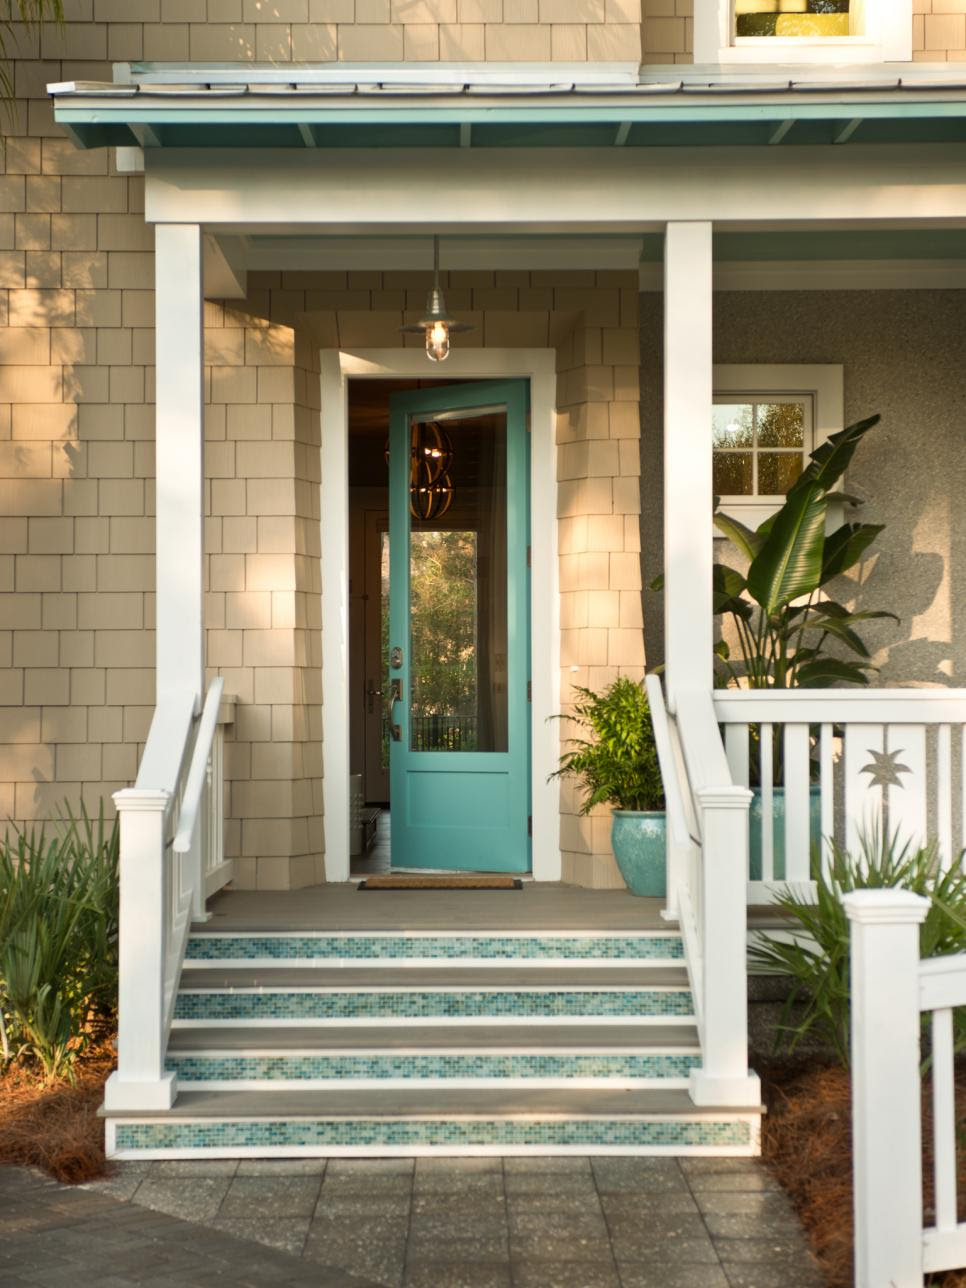 10 Tips For Giving Your Small Front Porch A Big Impact